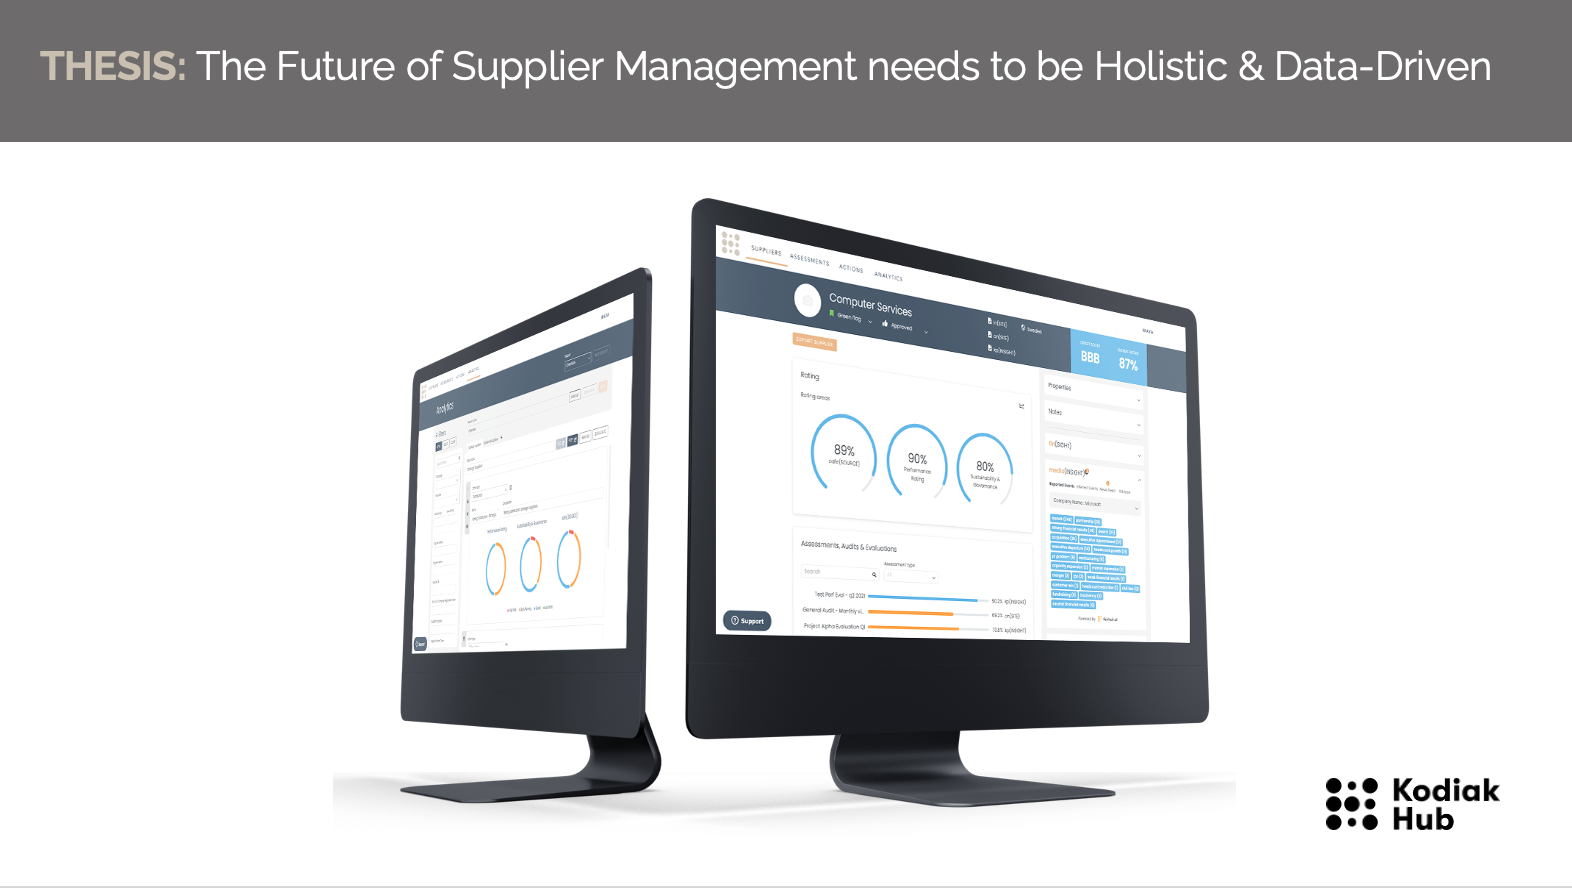 Data driven and holistic Supplier Management